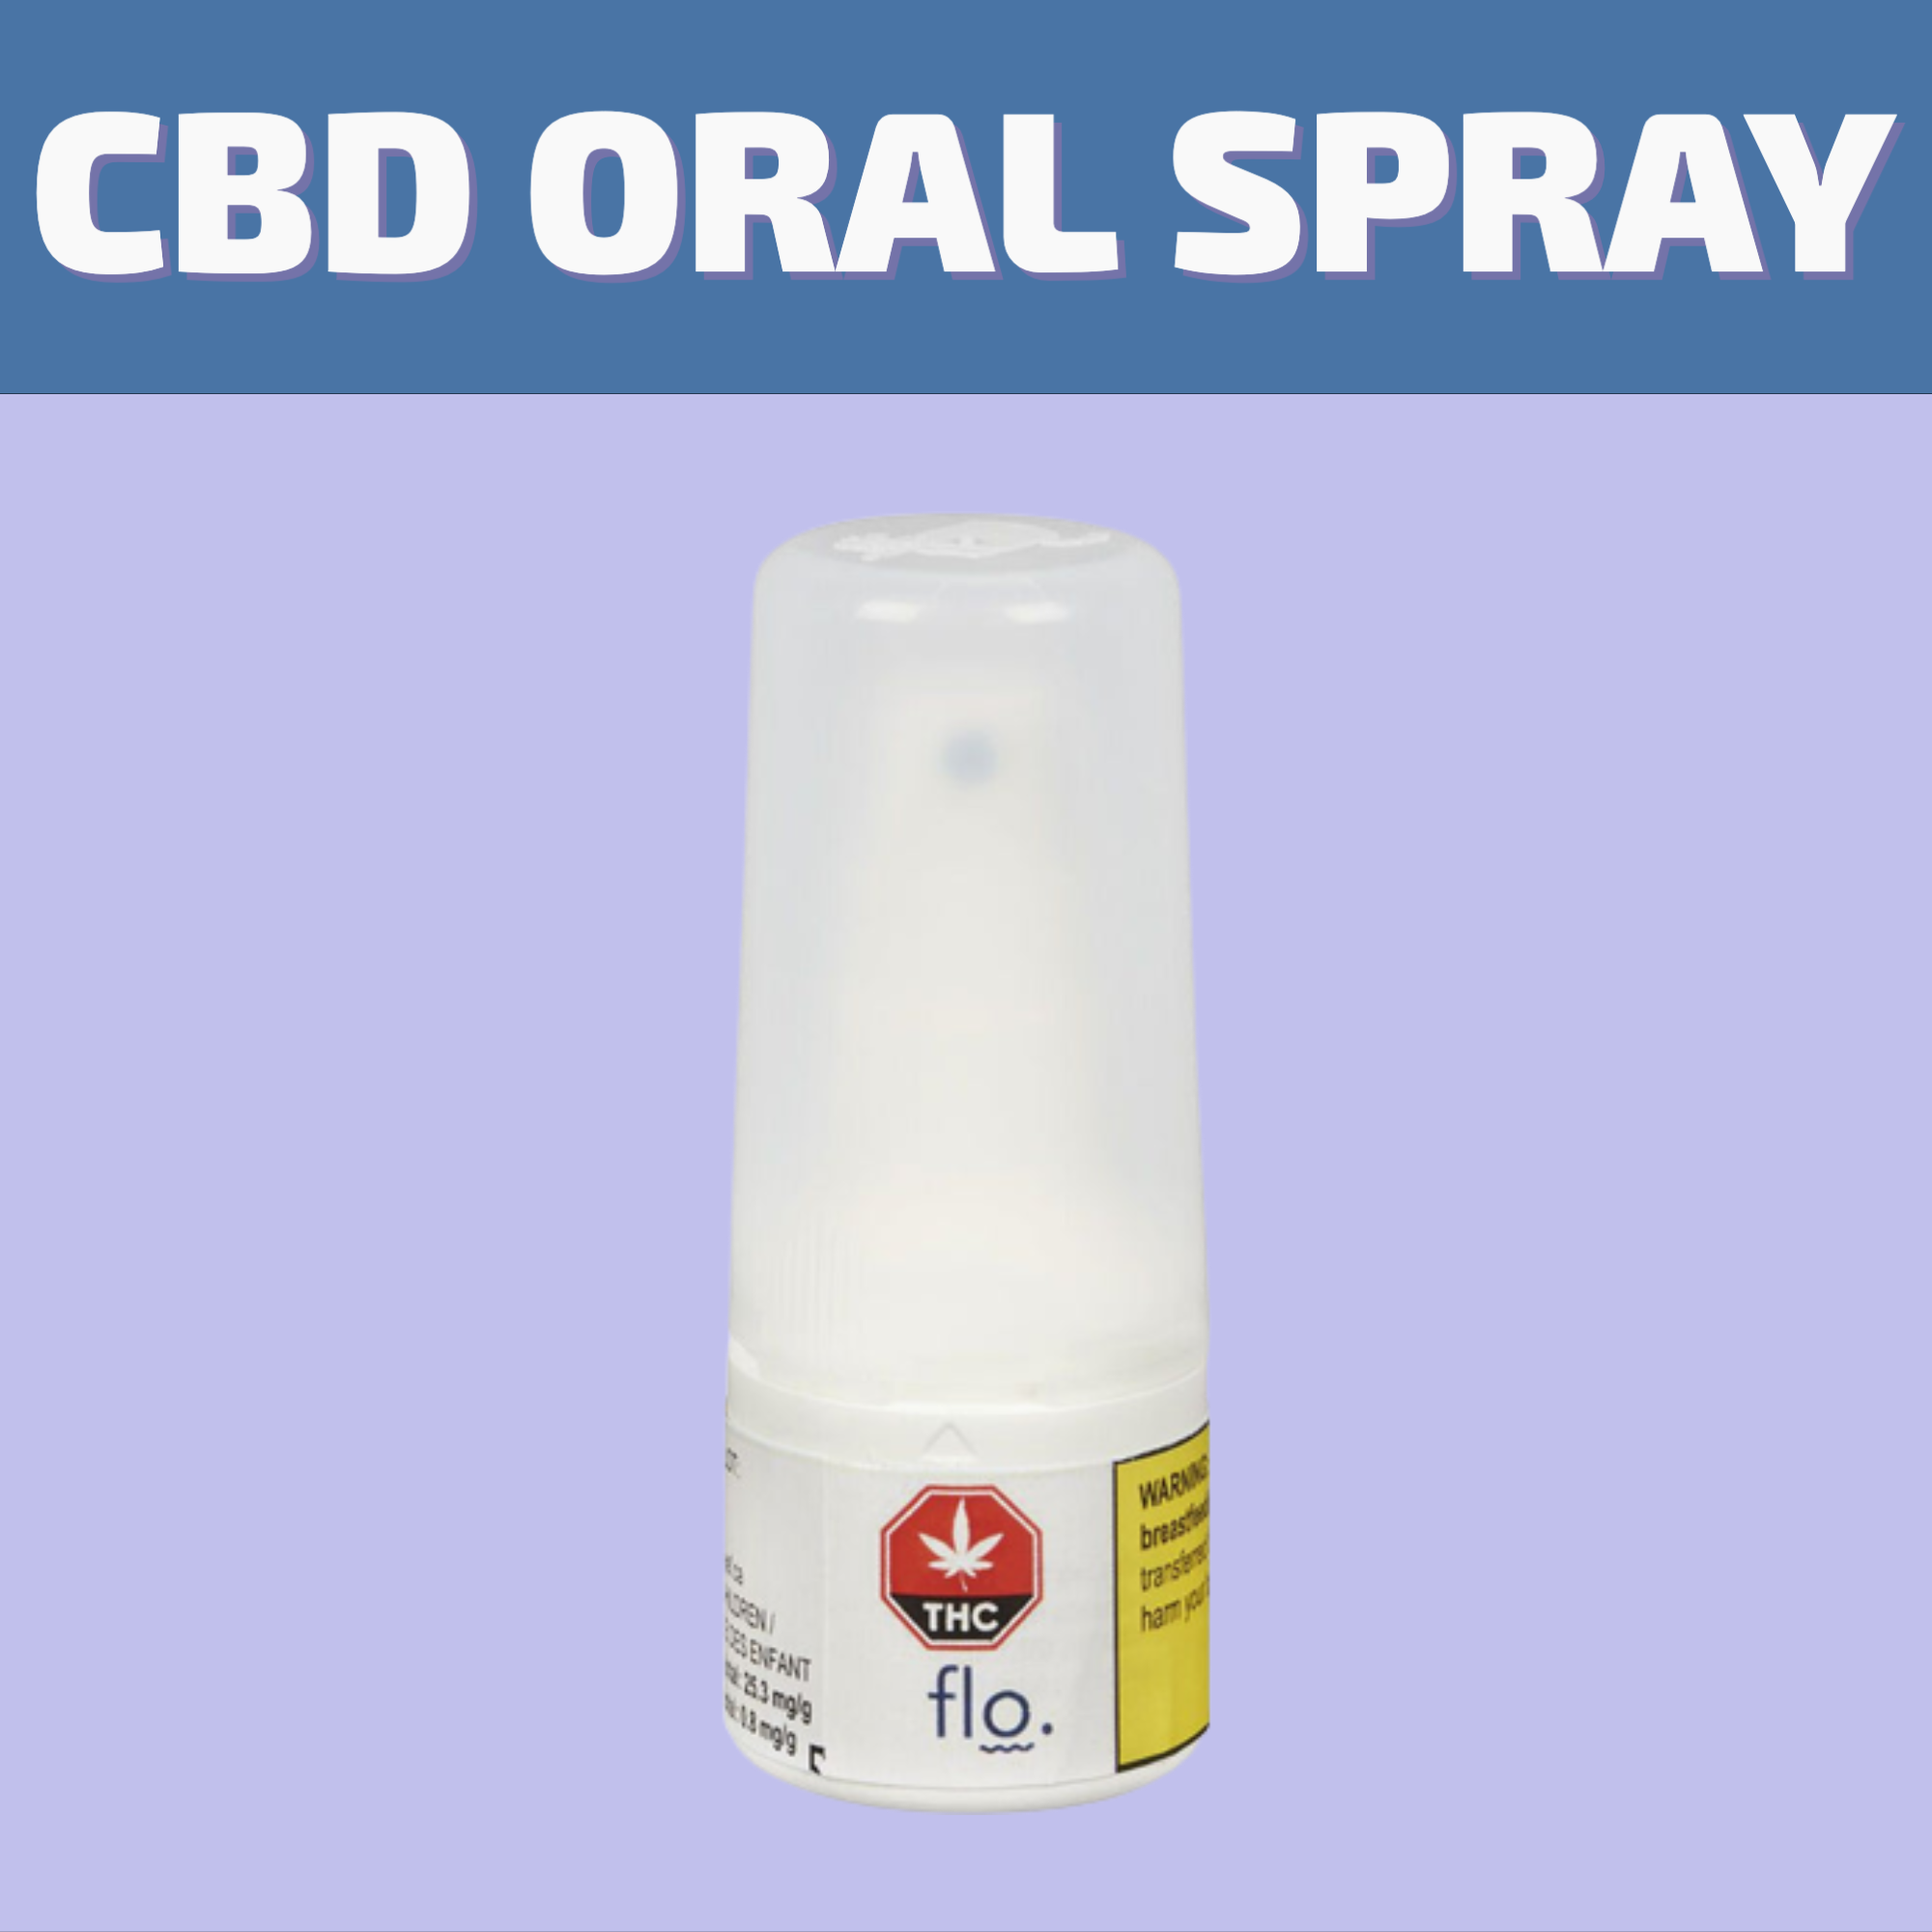 Shop the best selection of CBD Spray and CBD Oil for same day delivery or pick it up at our dispensary on 580 Academy Road.  